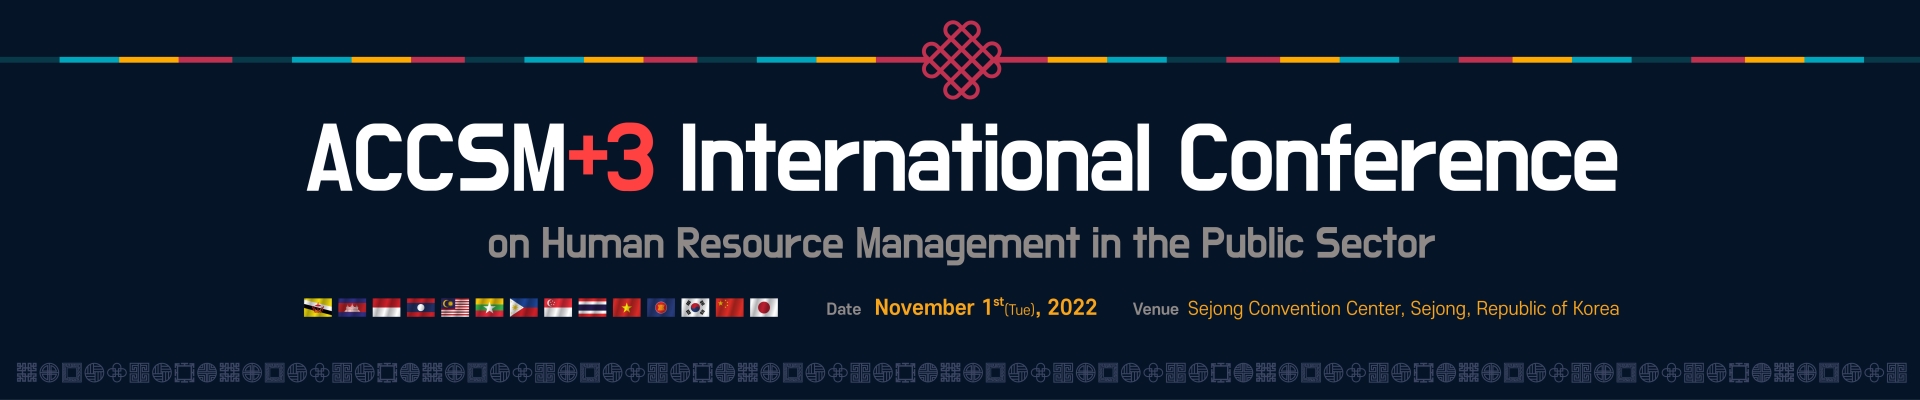 2022 ACCSM+3 International Conference on Human Resource Management in the Public Sector